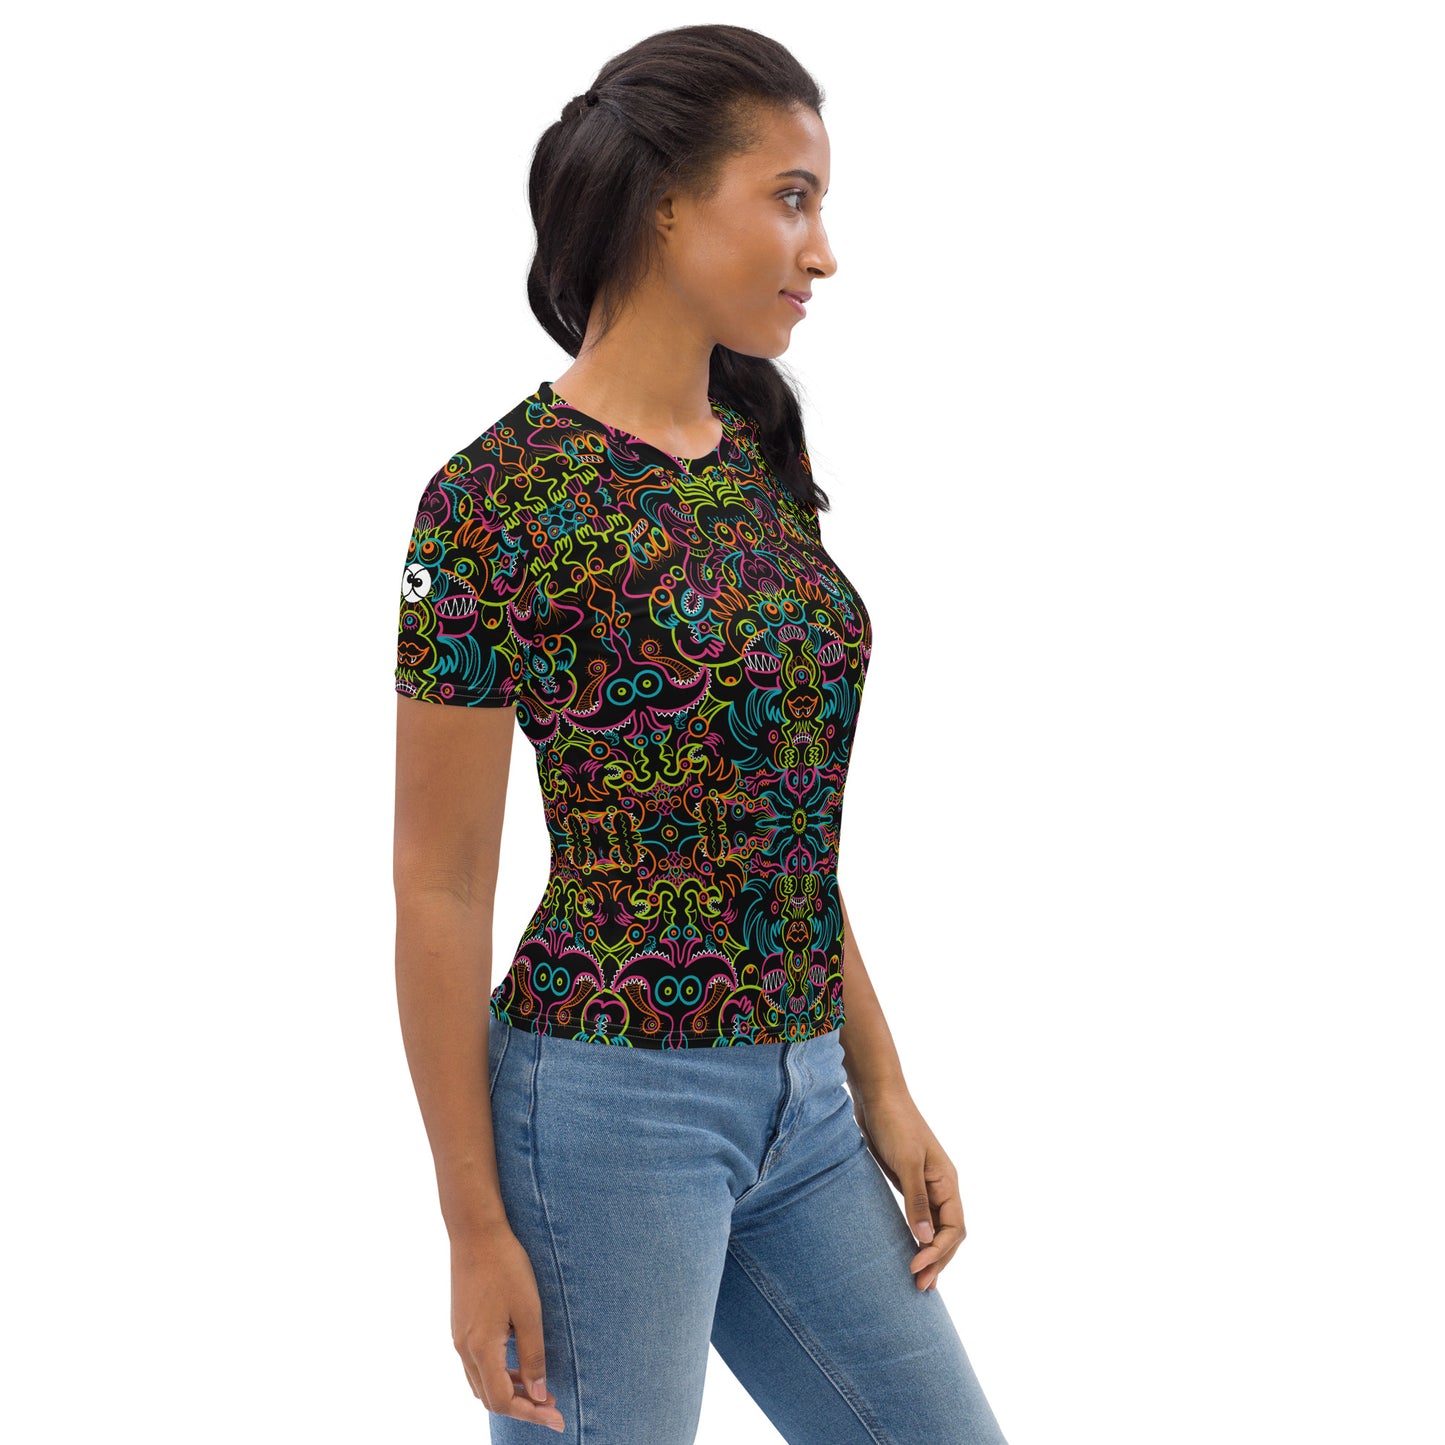 Doodle Carnival: A Kaleidoscope of Whimsical Wonders! - All-over print Women's T-shirt. Side view